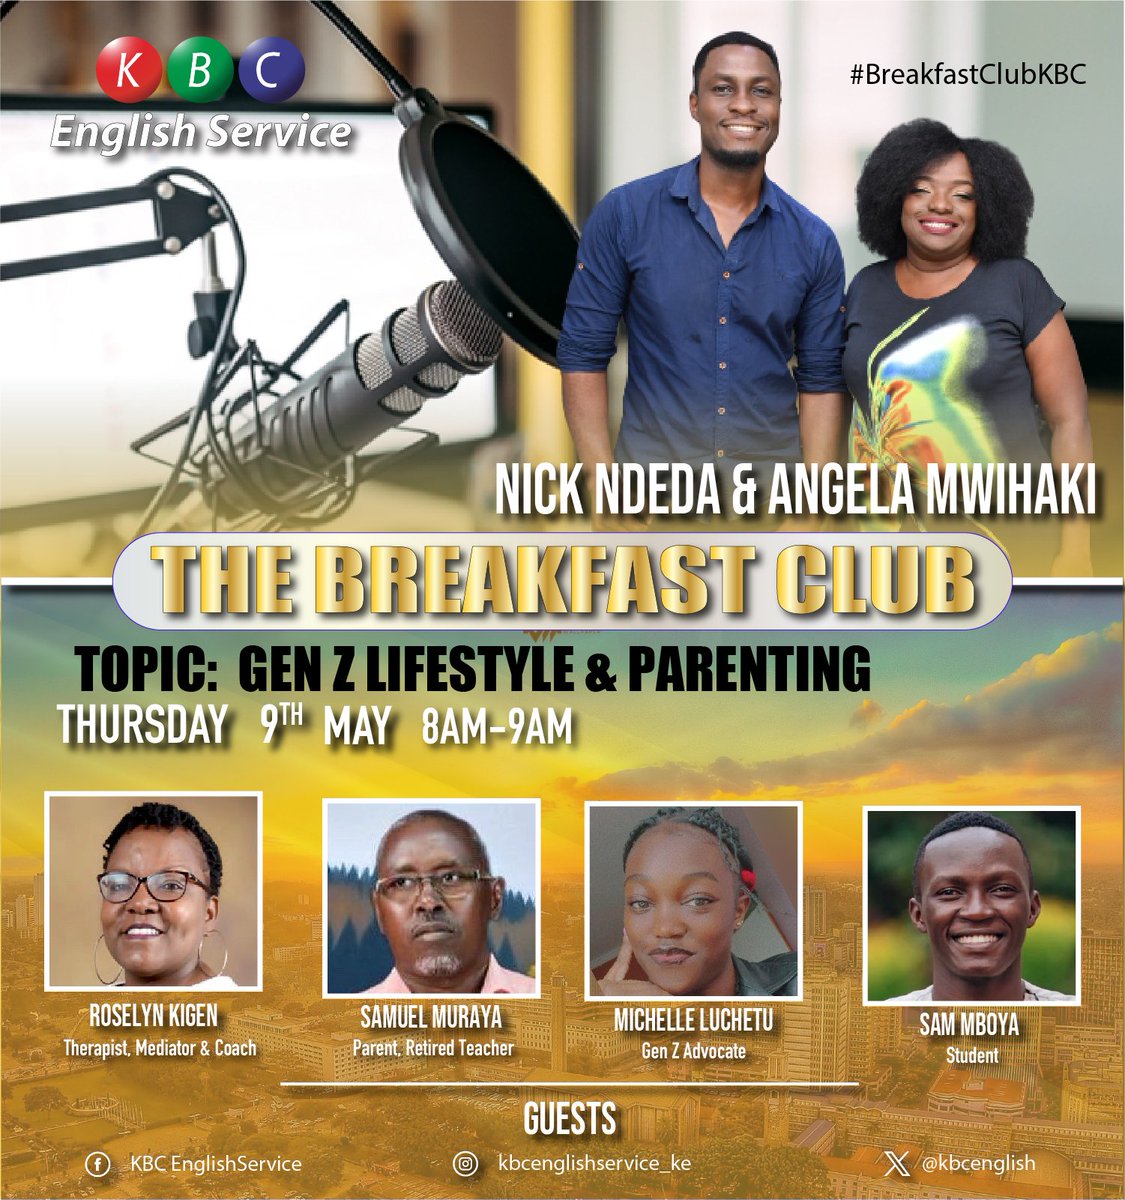 What do you find most interesting about the Gen Zs? Thursday starts here on the Breakfast Club from 0500HRS to 1000HRS with Nick Ndeda & Angela Mwihaki GOOD MORNING! Listen live: kbc.co.ke/radio/ ^PMN #BreakfastClubKBC @NickNdeda | @angelamwihaki